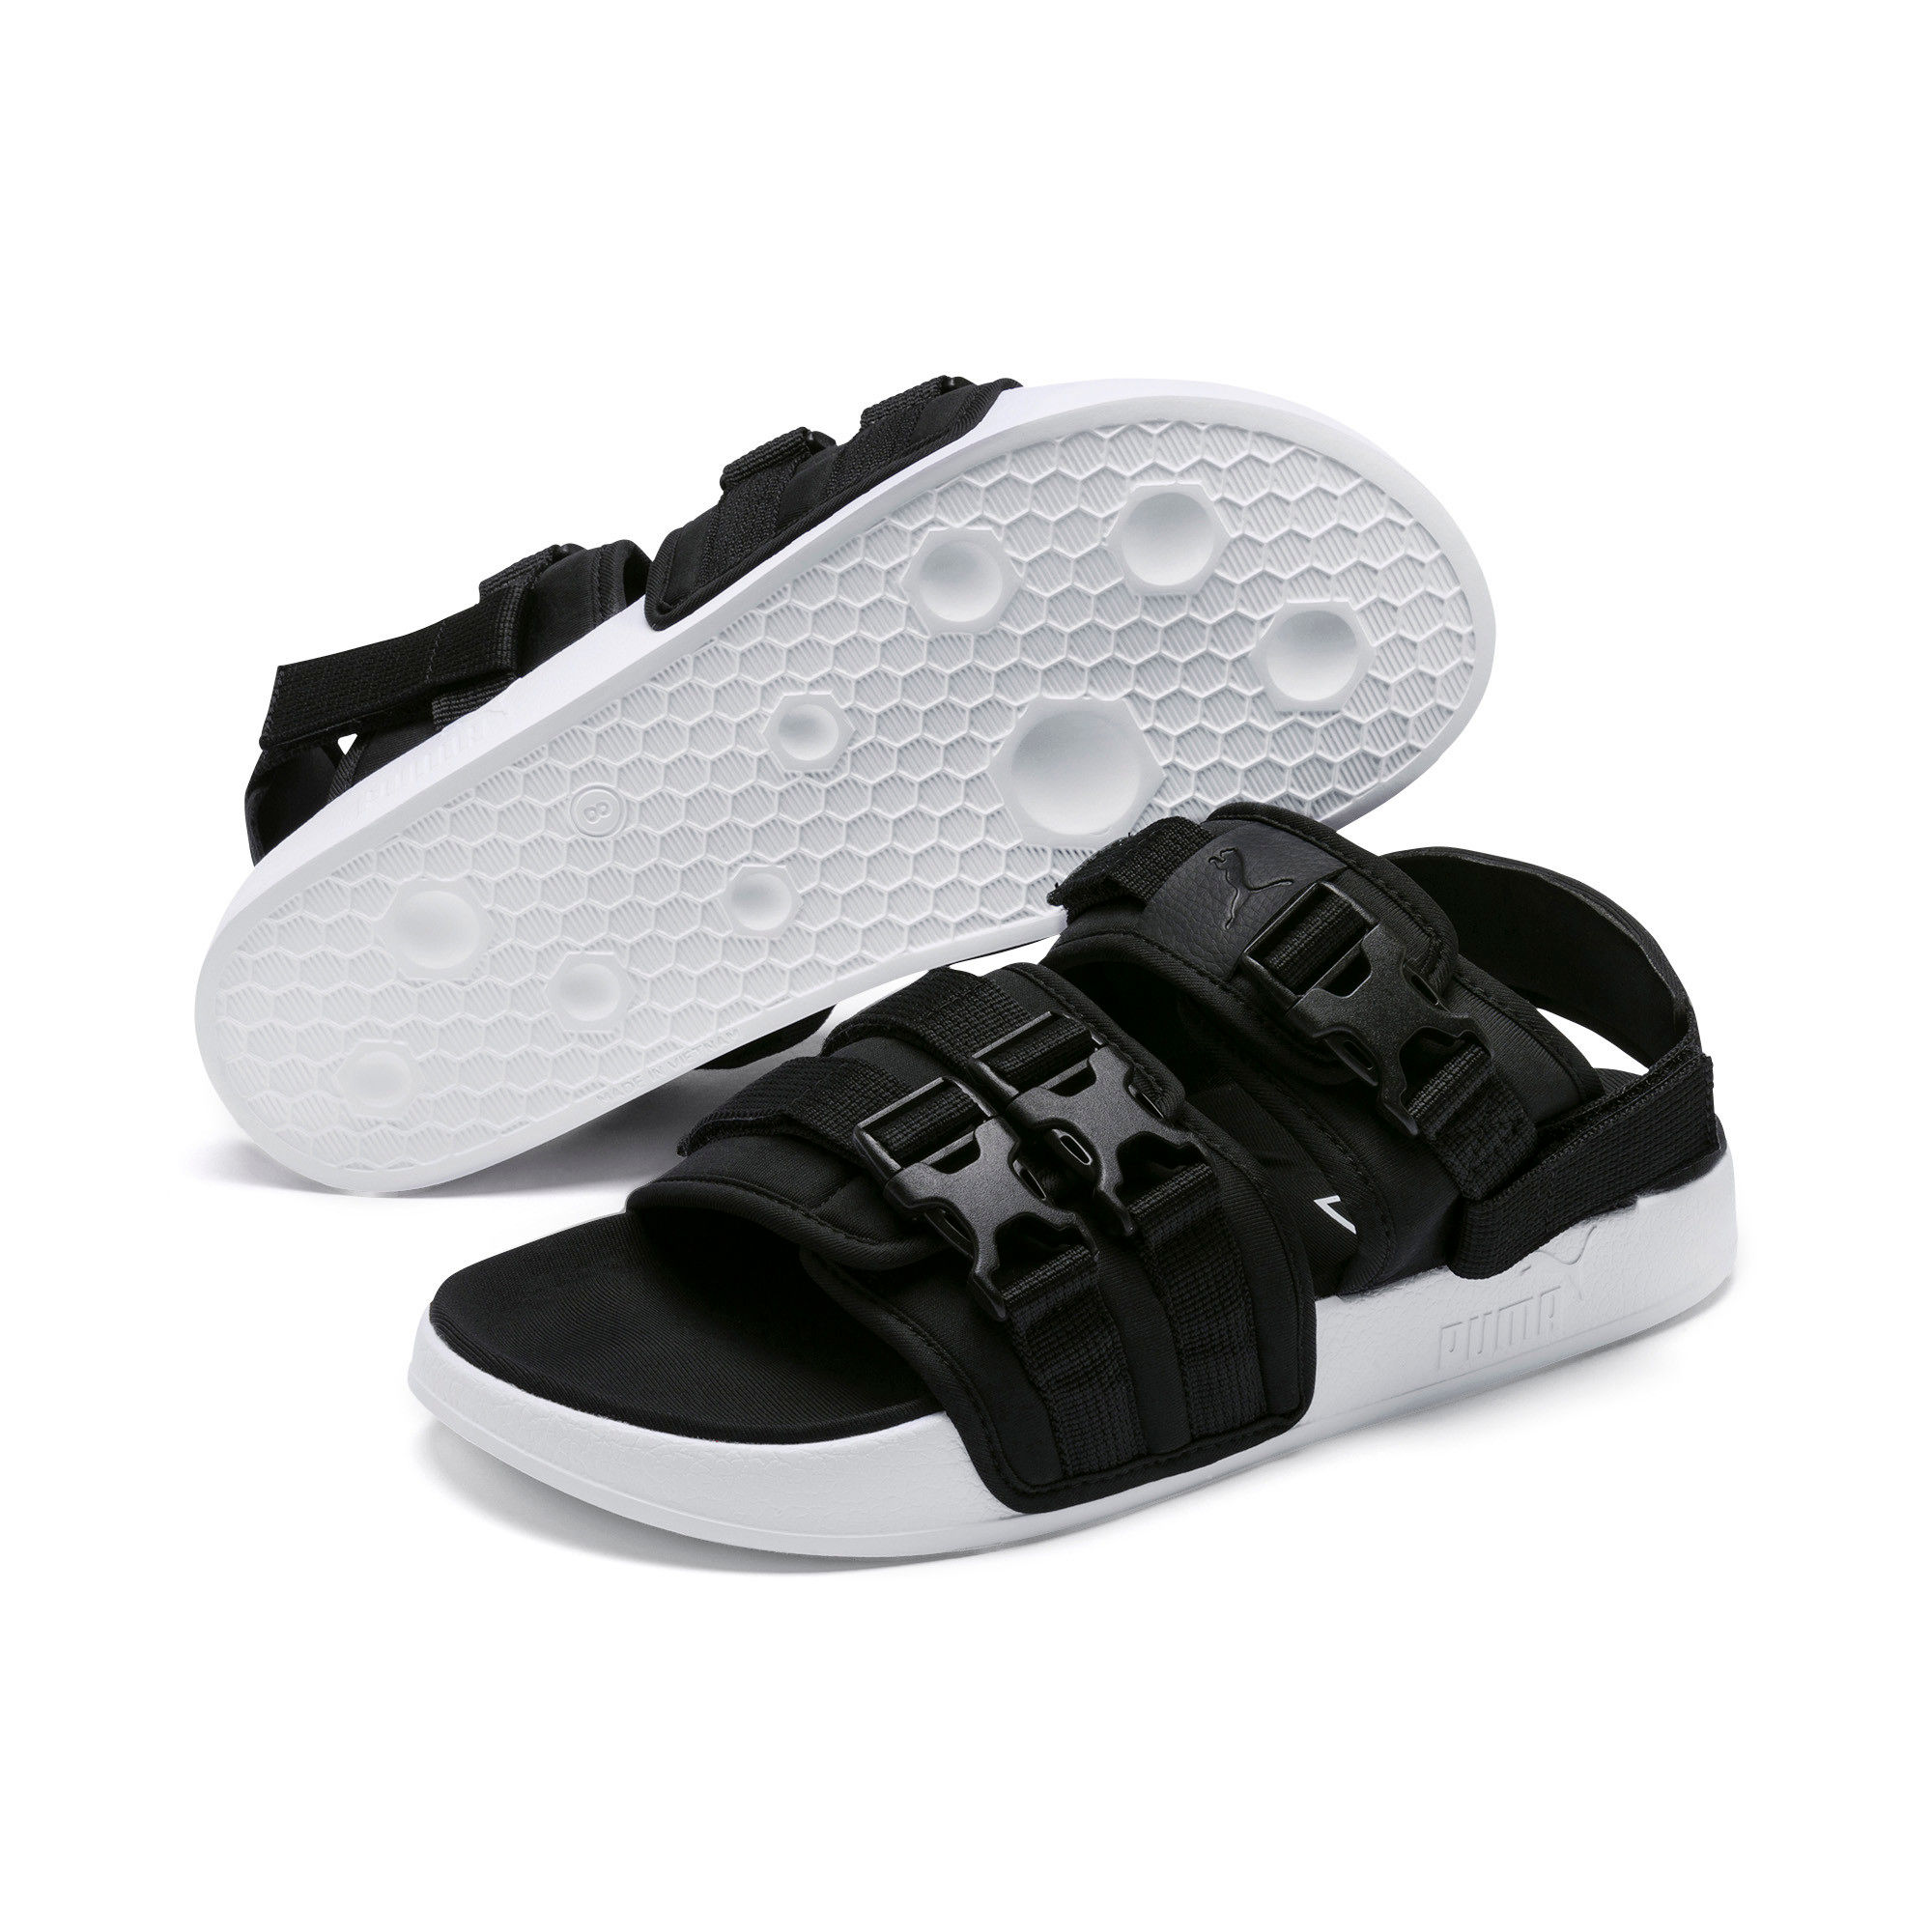 Men's PUMA Sandals and Slides from $16 | Lyst - Page 3